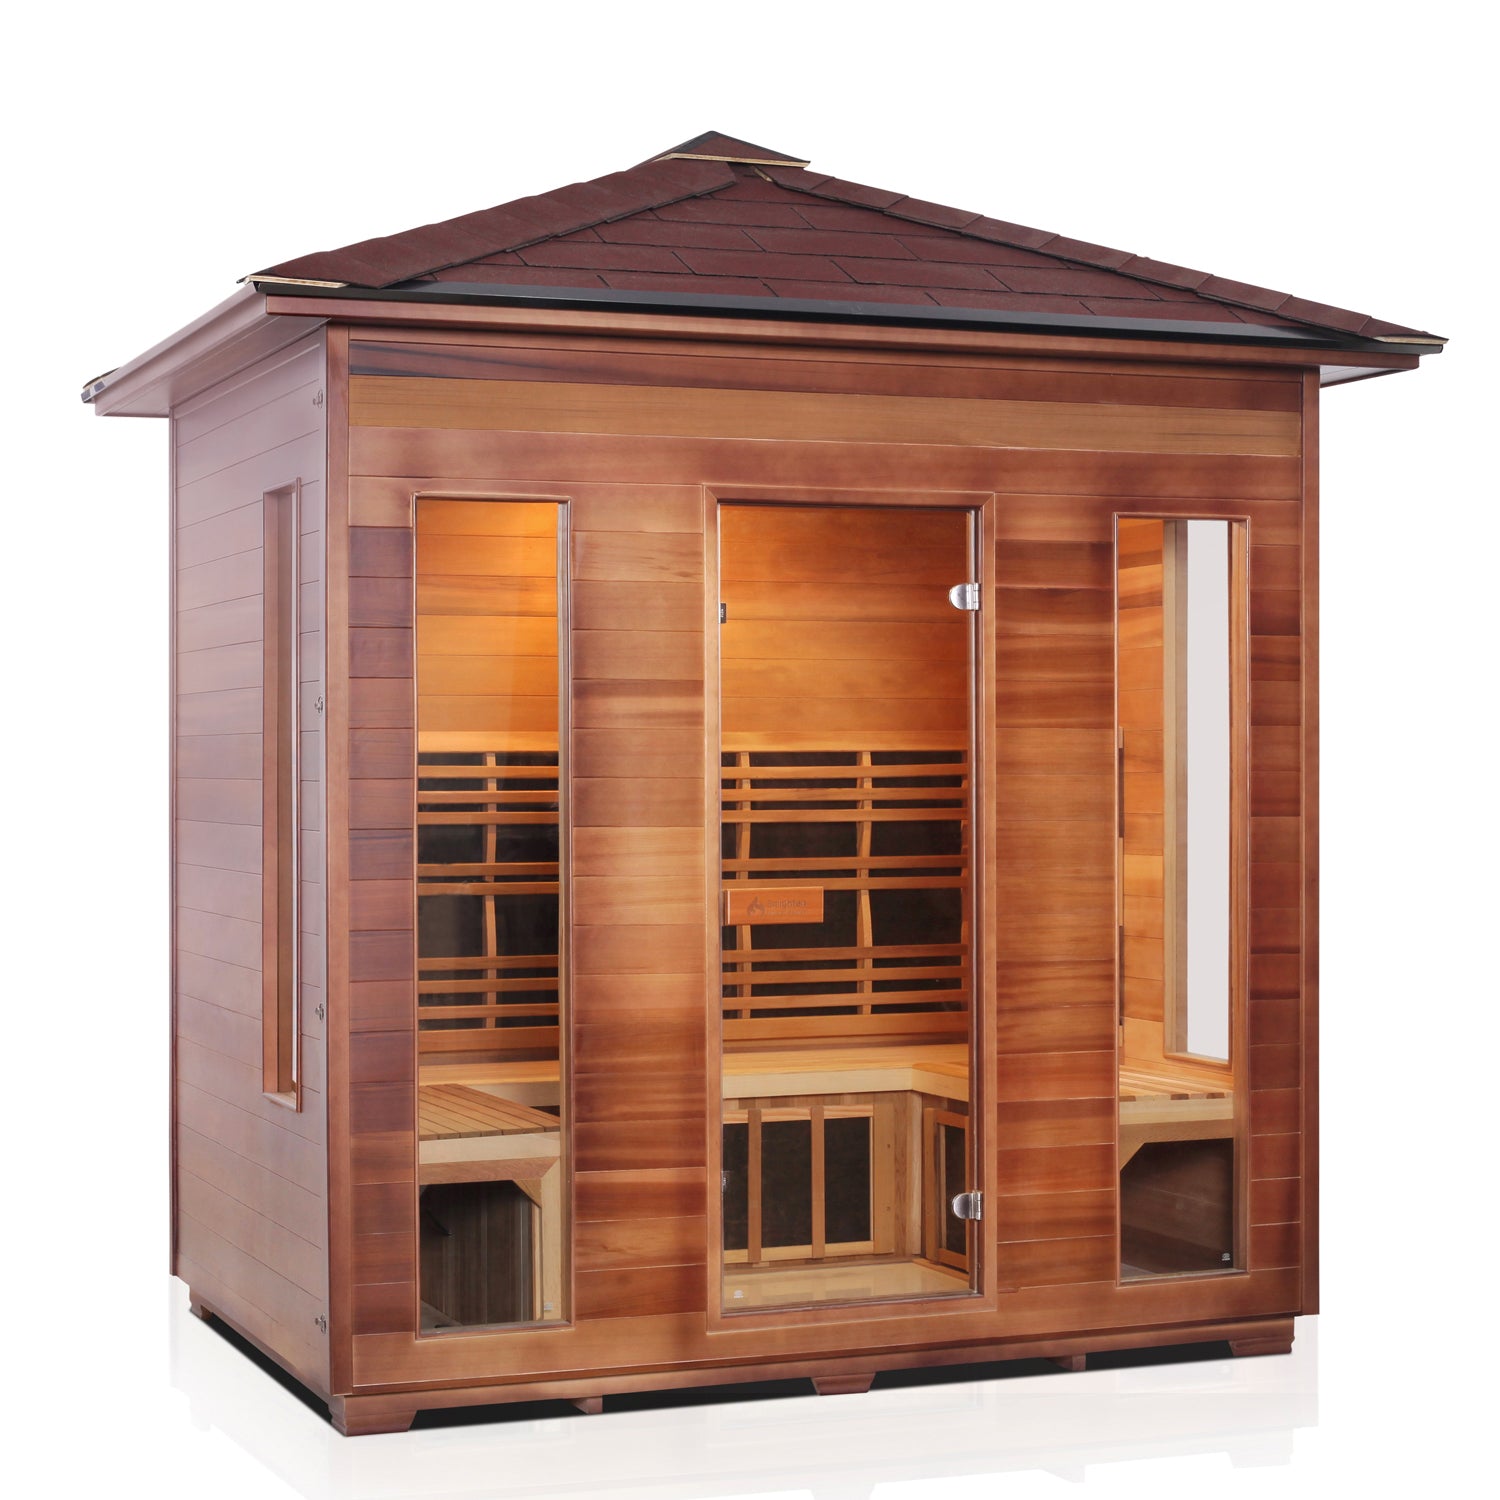 Rustic infrared sauna Canadian red cedar inside and out with peak roof and glass door and windows front view